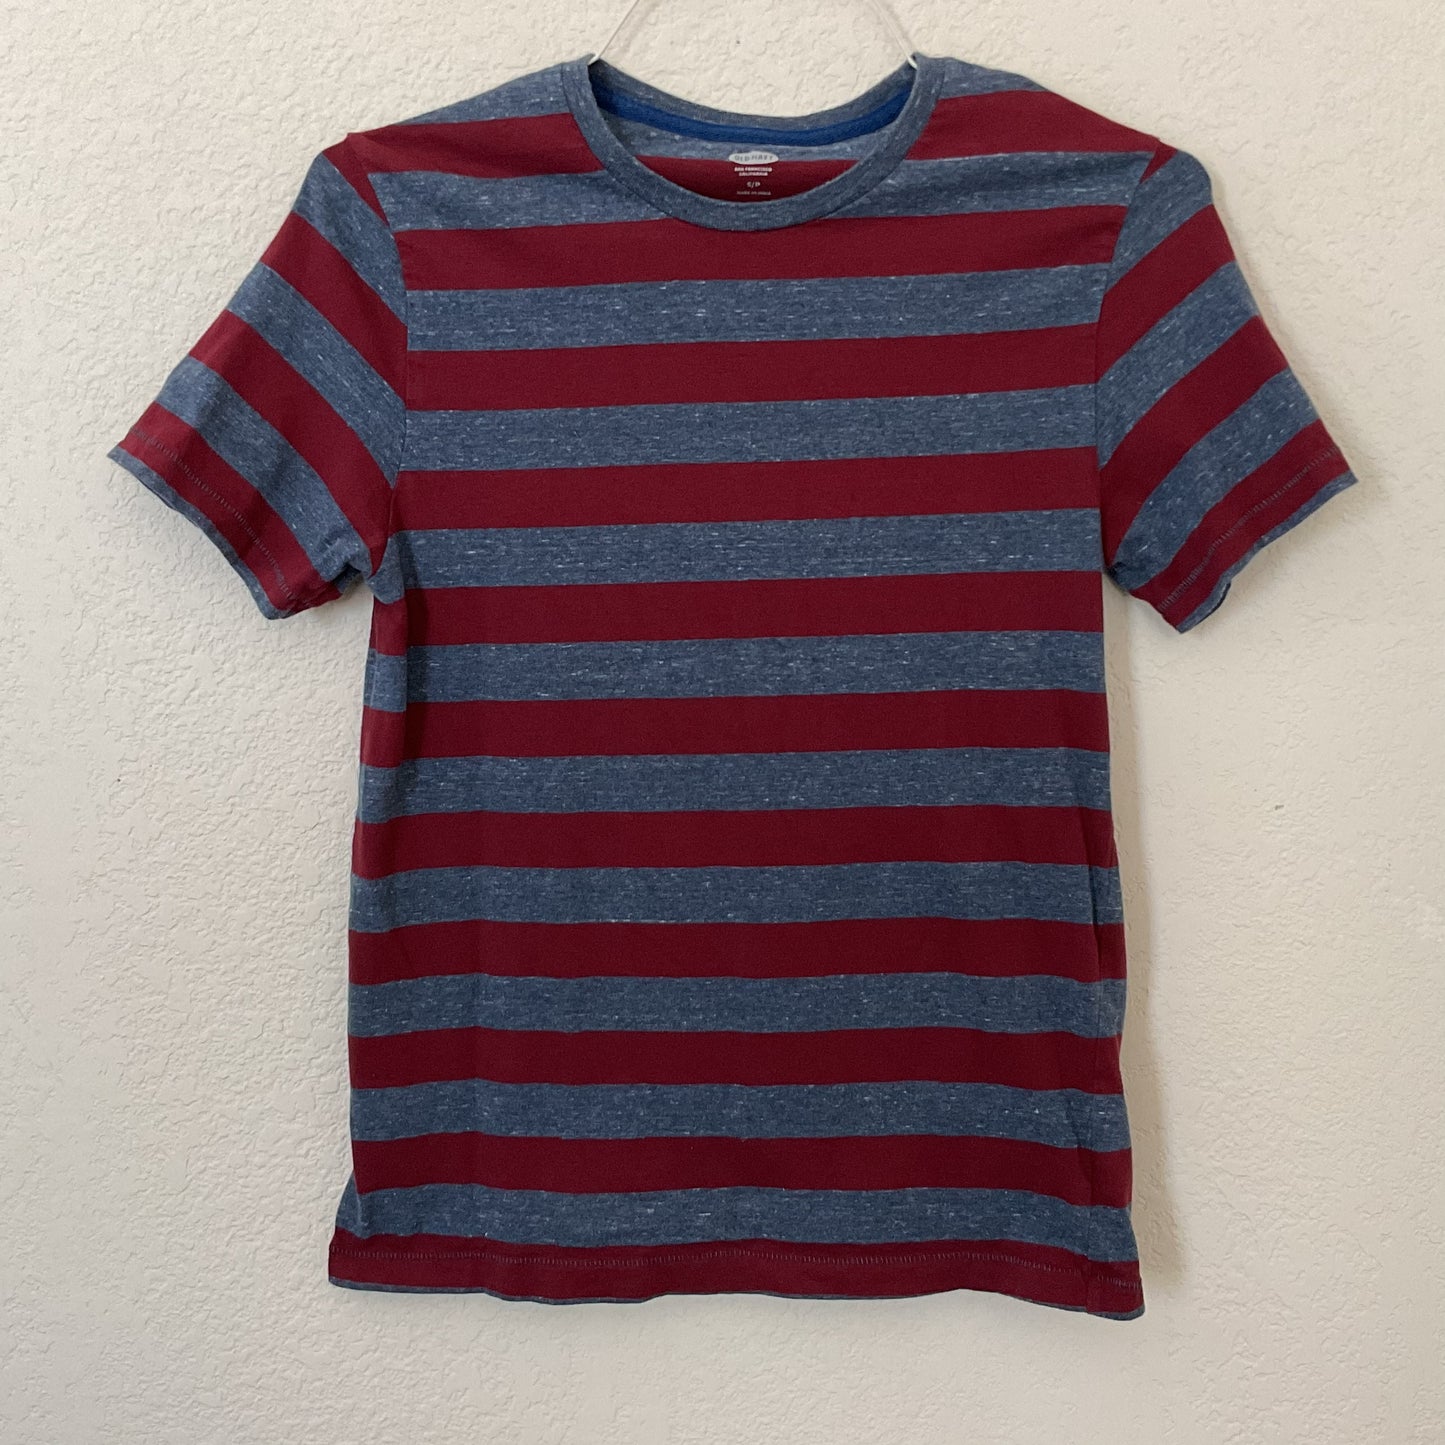 Old Navy Boys Stripped T-shirt Size S(8/10).